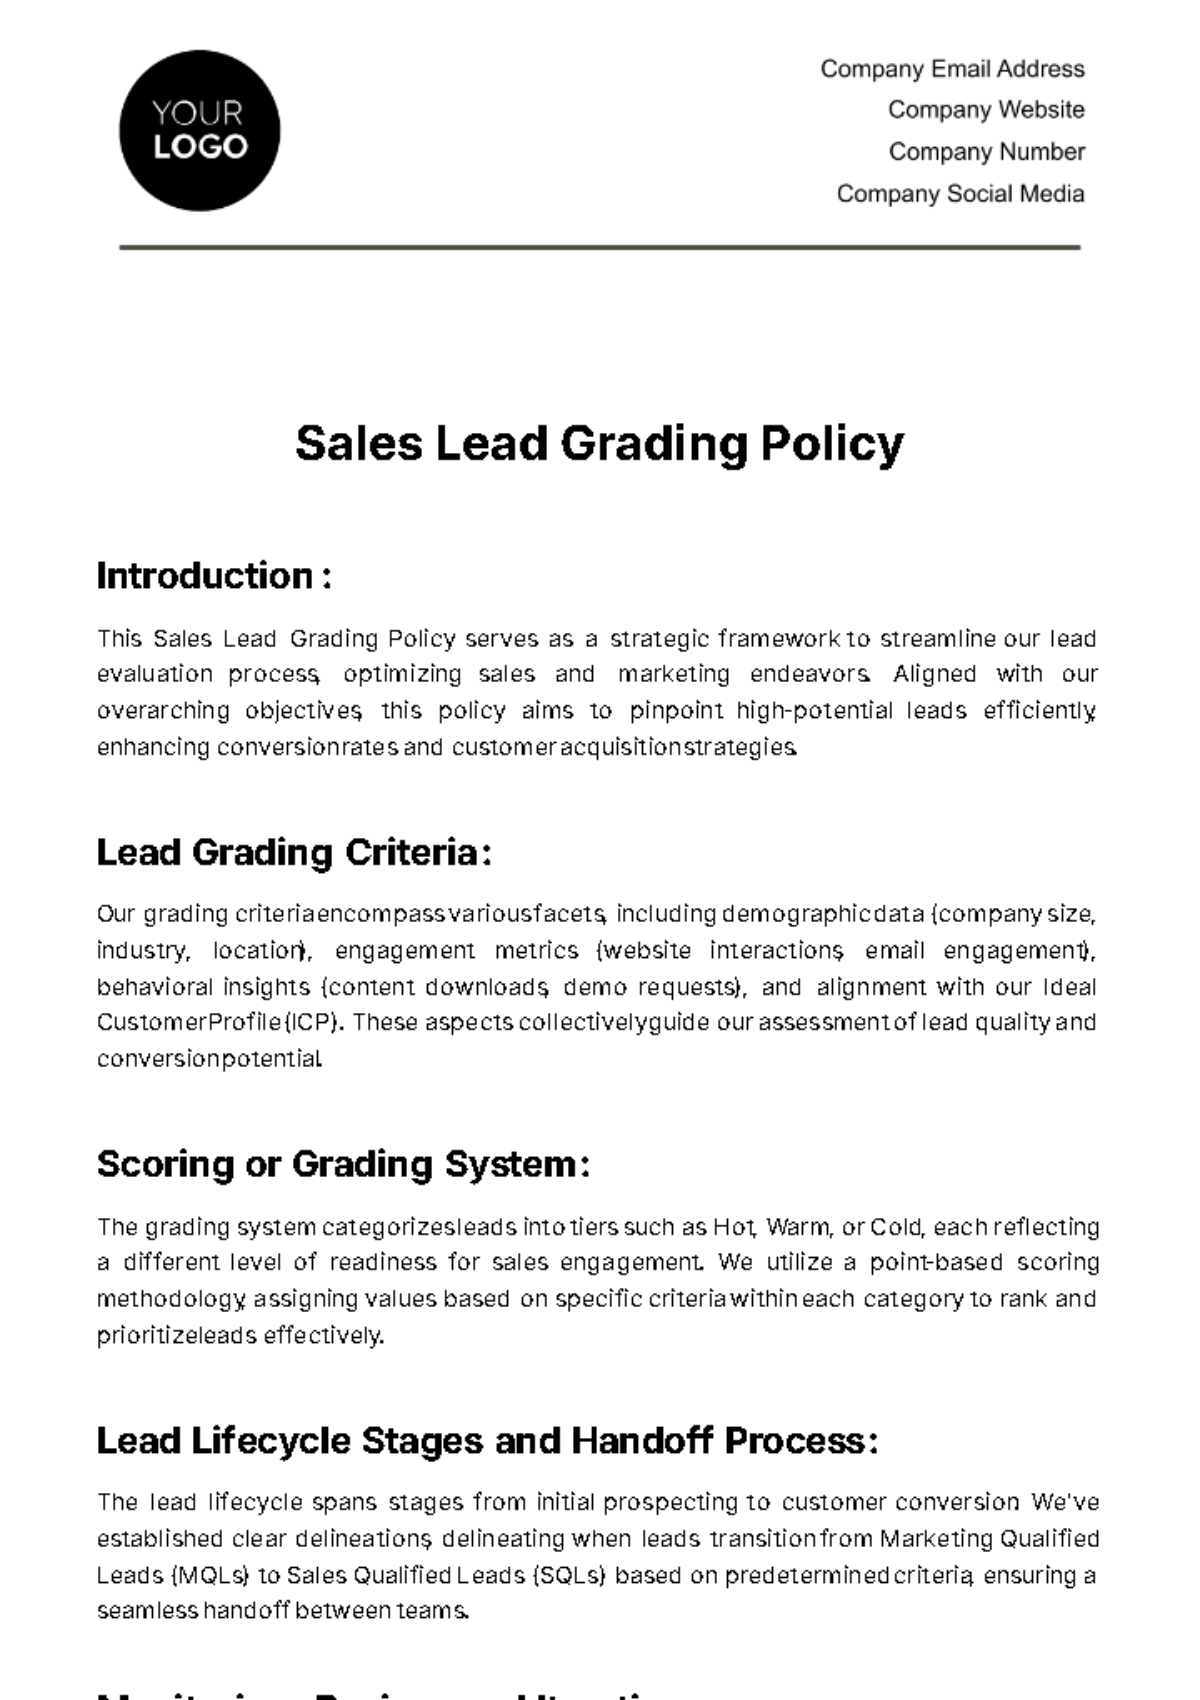 Free Sales Lead Grading Policy Template